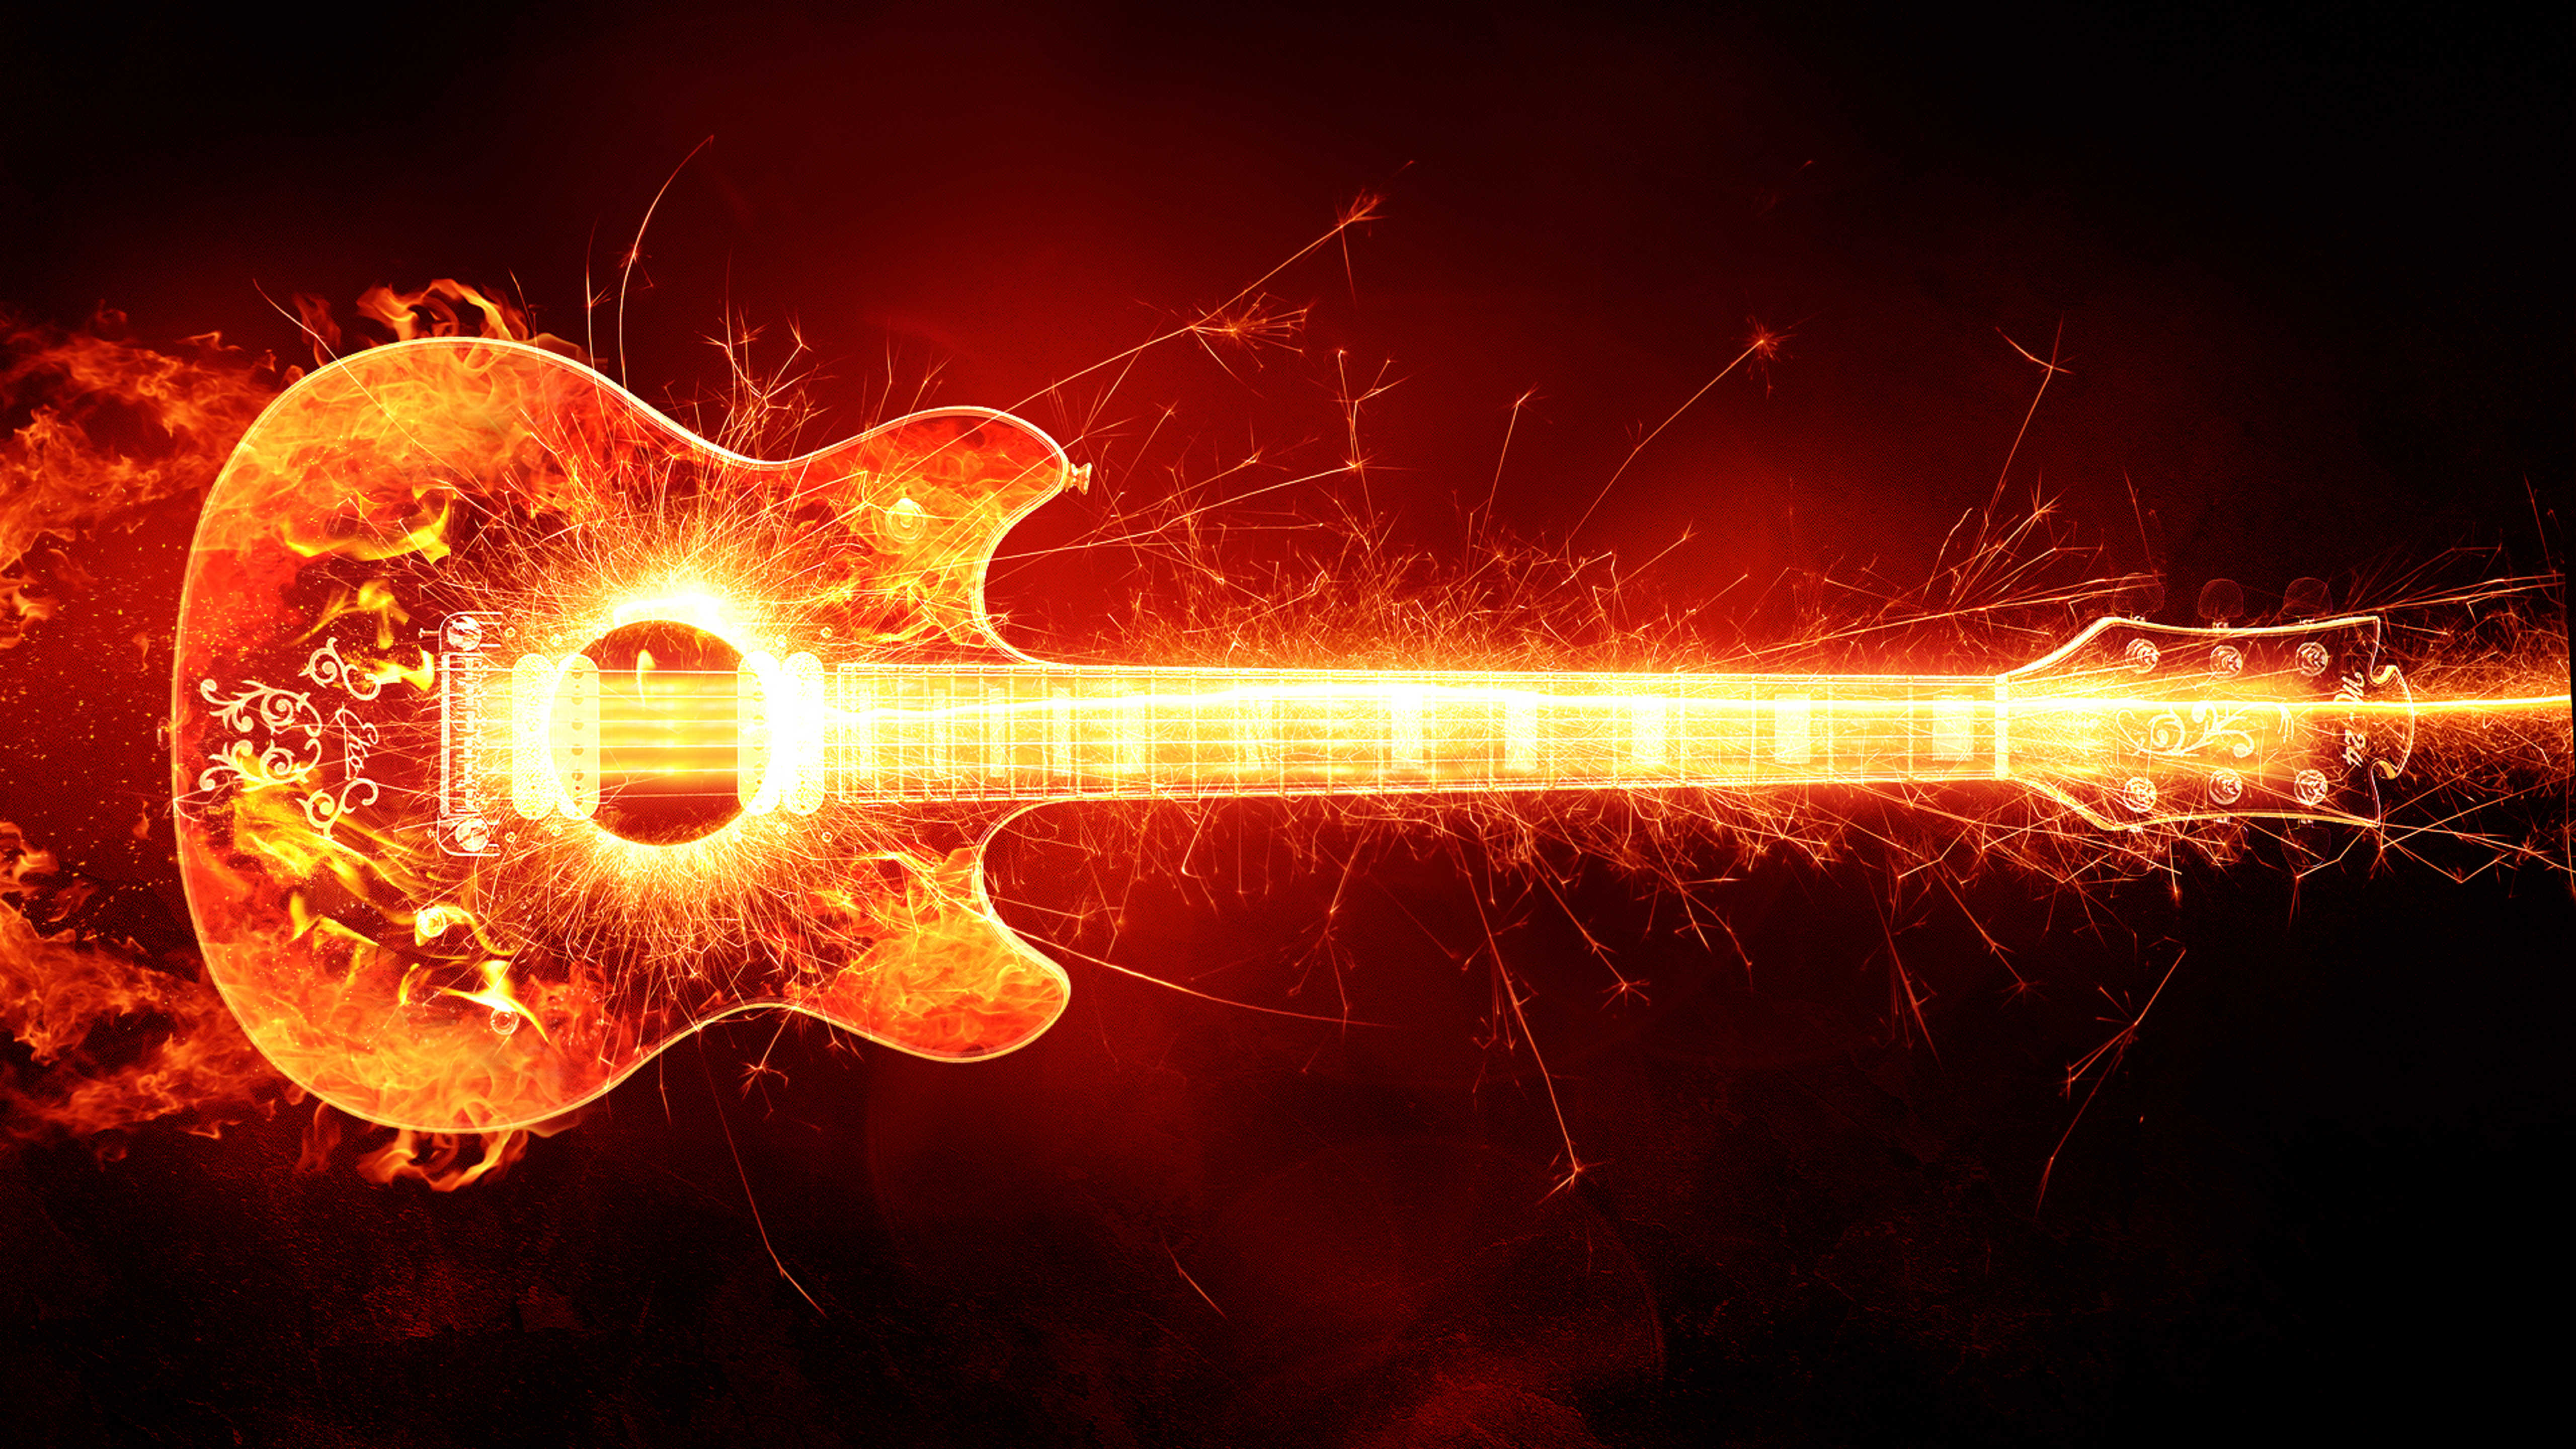 Wallpaper Download 5120x2880 Guitar with fire and sparks